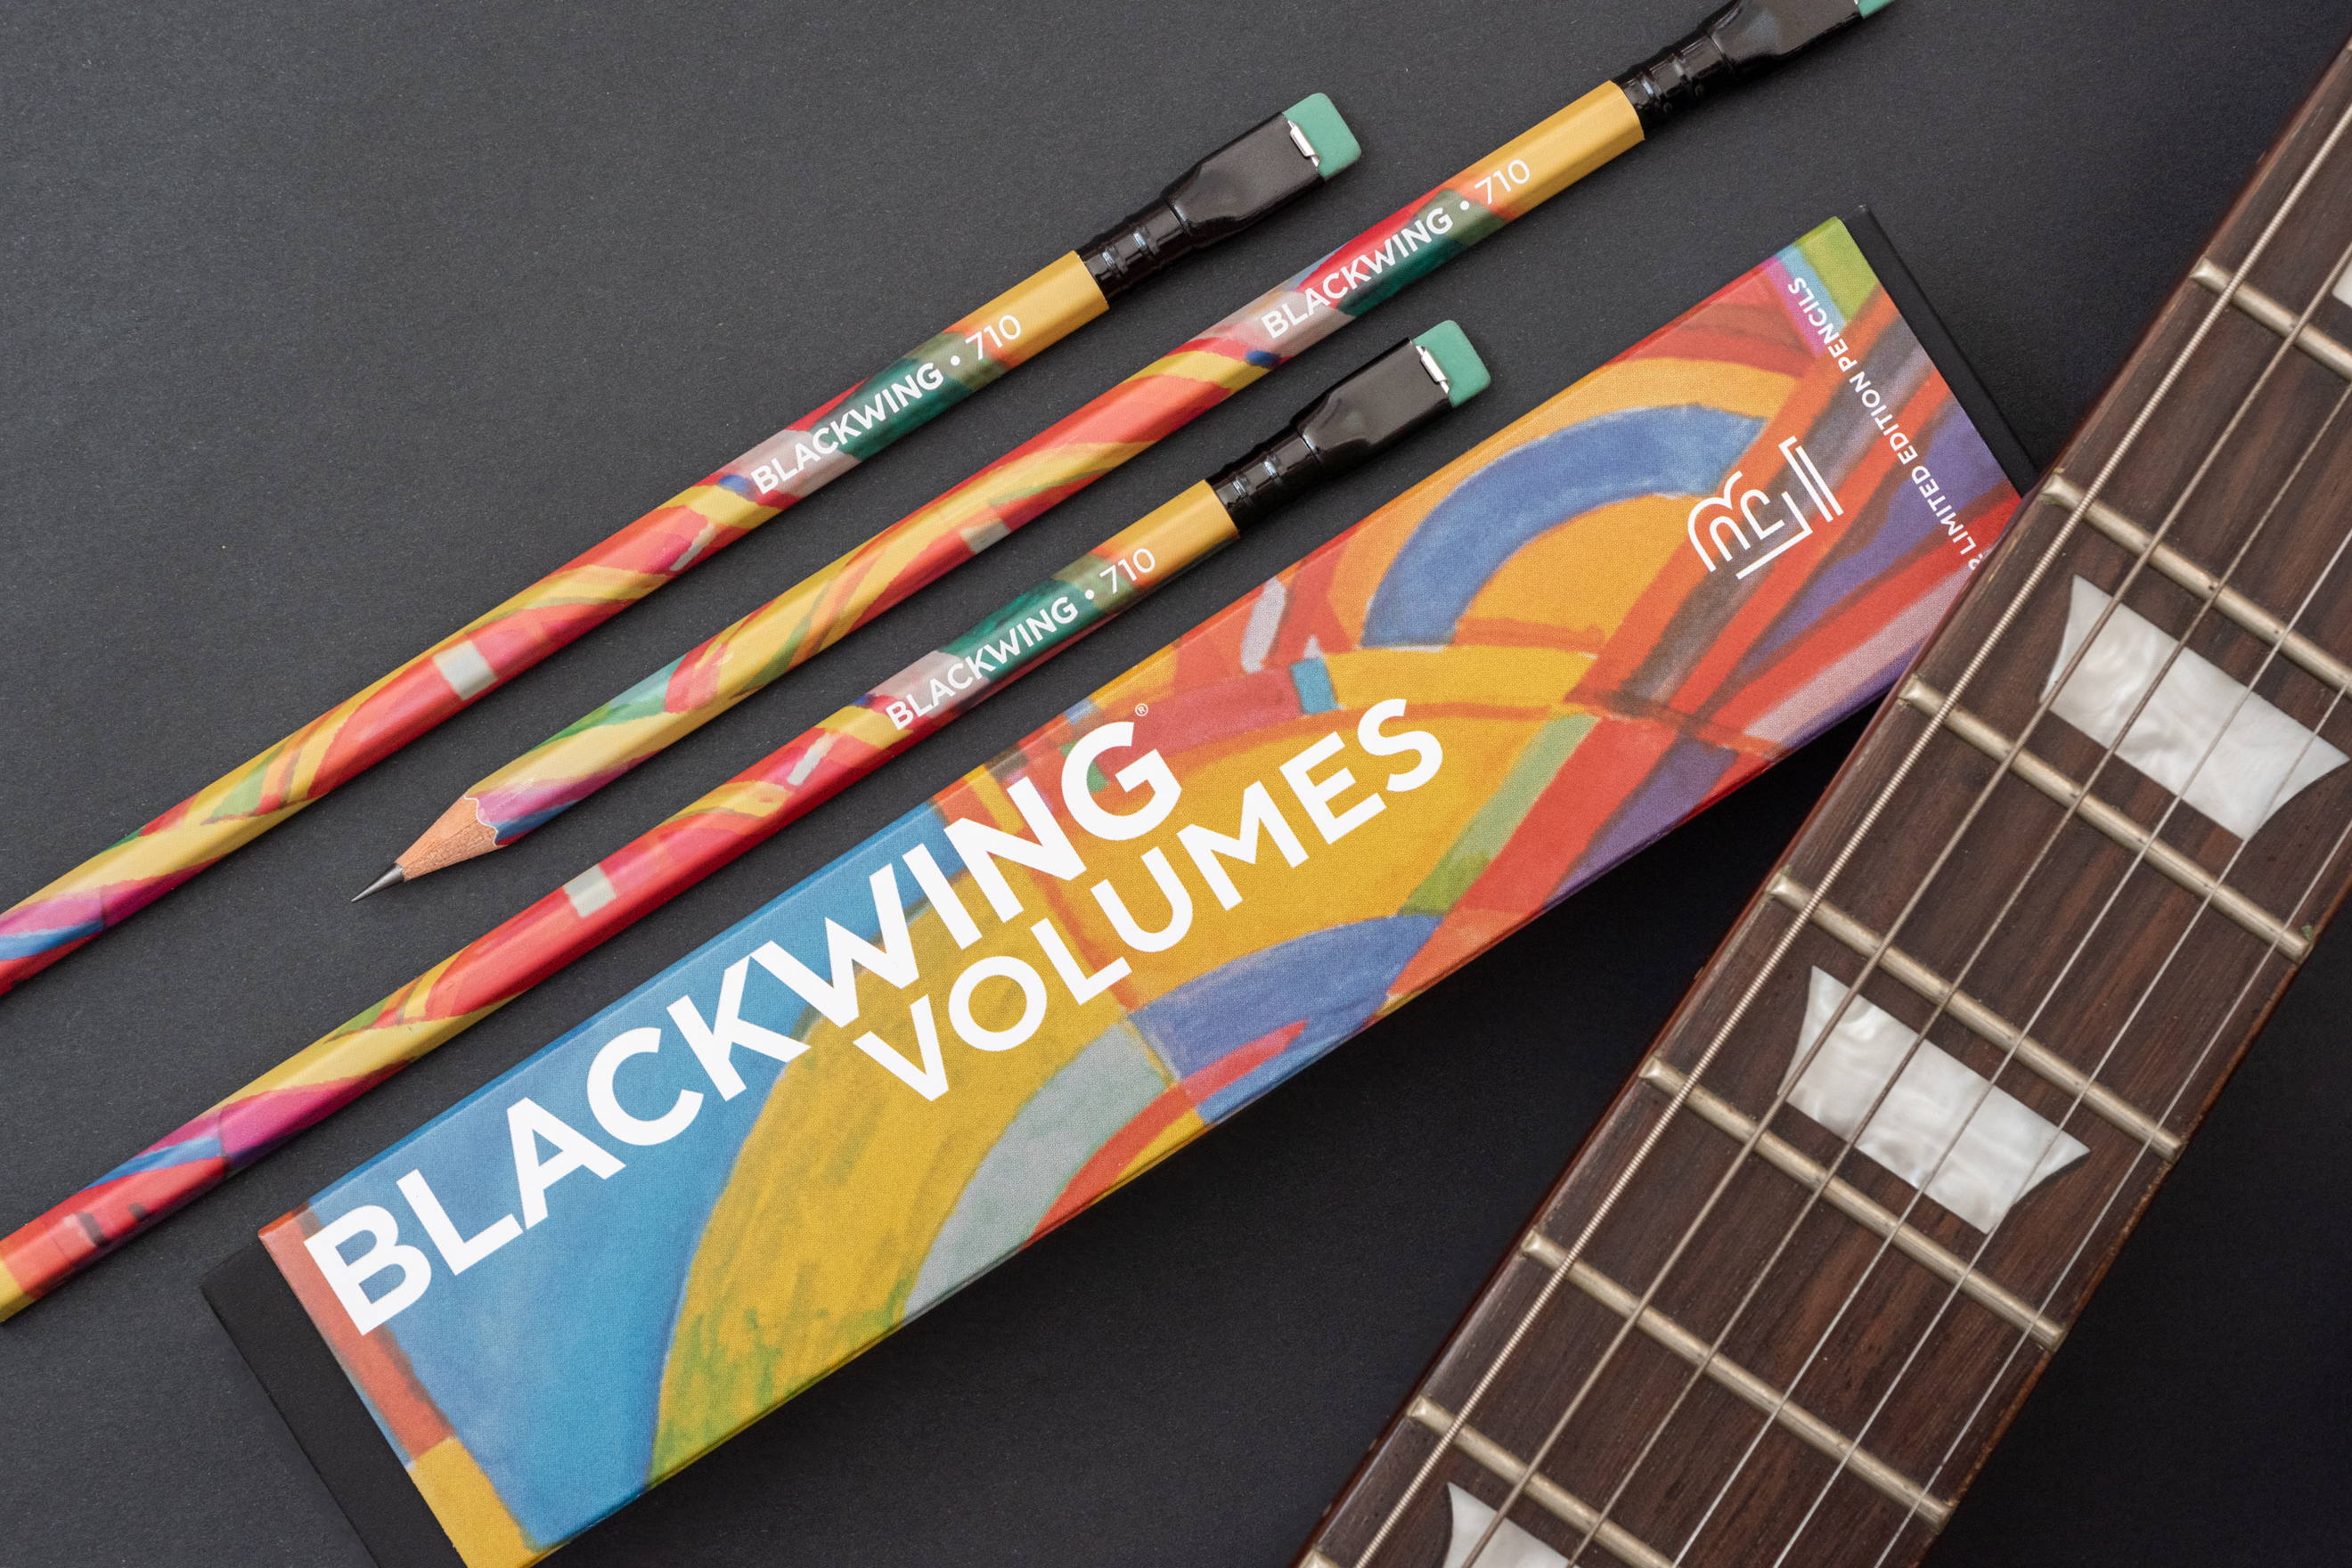 An image of Blackwing 710 pencils next to a guitar